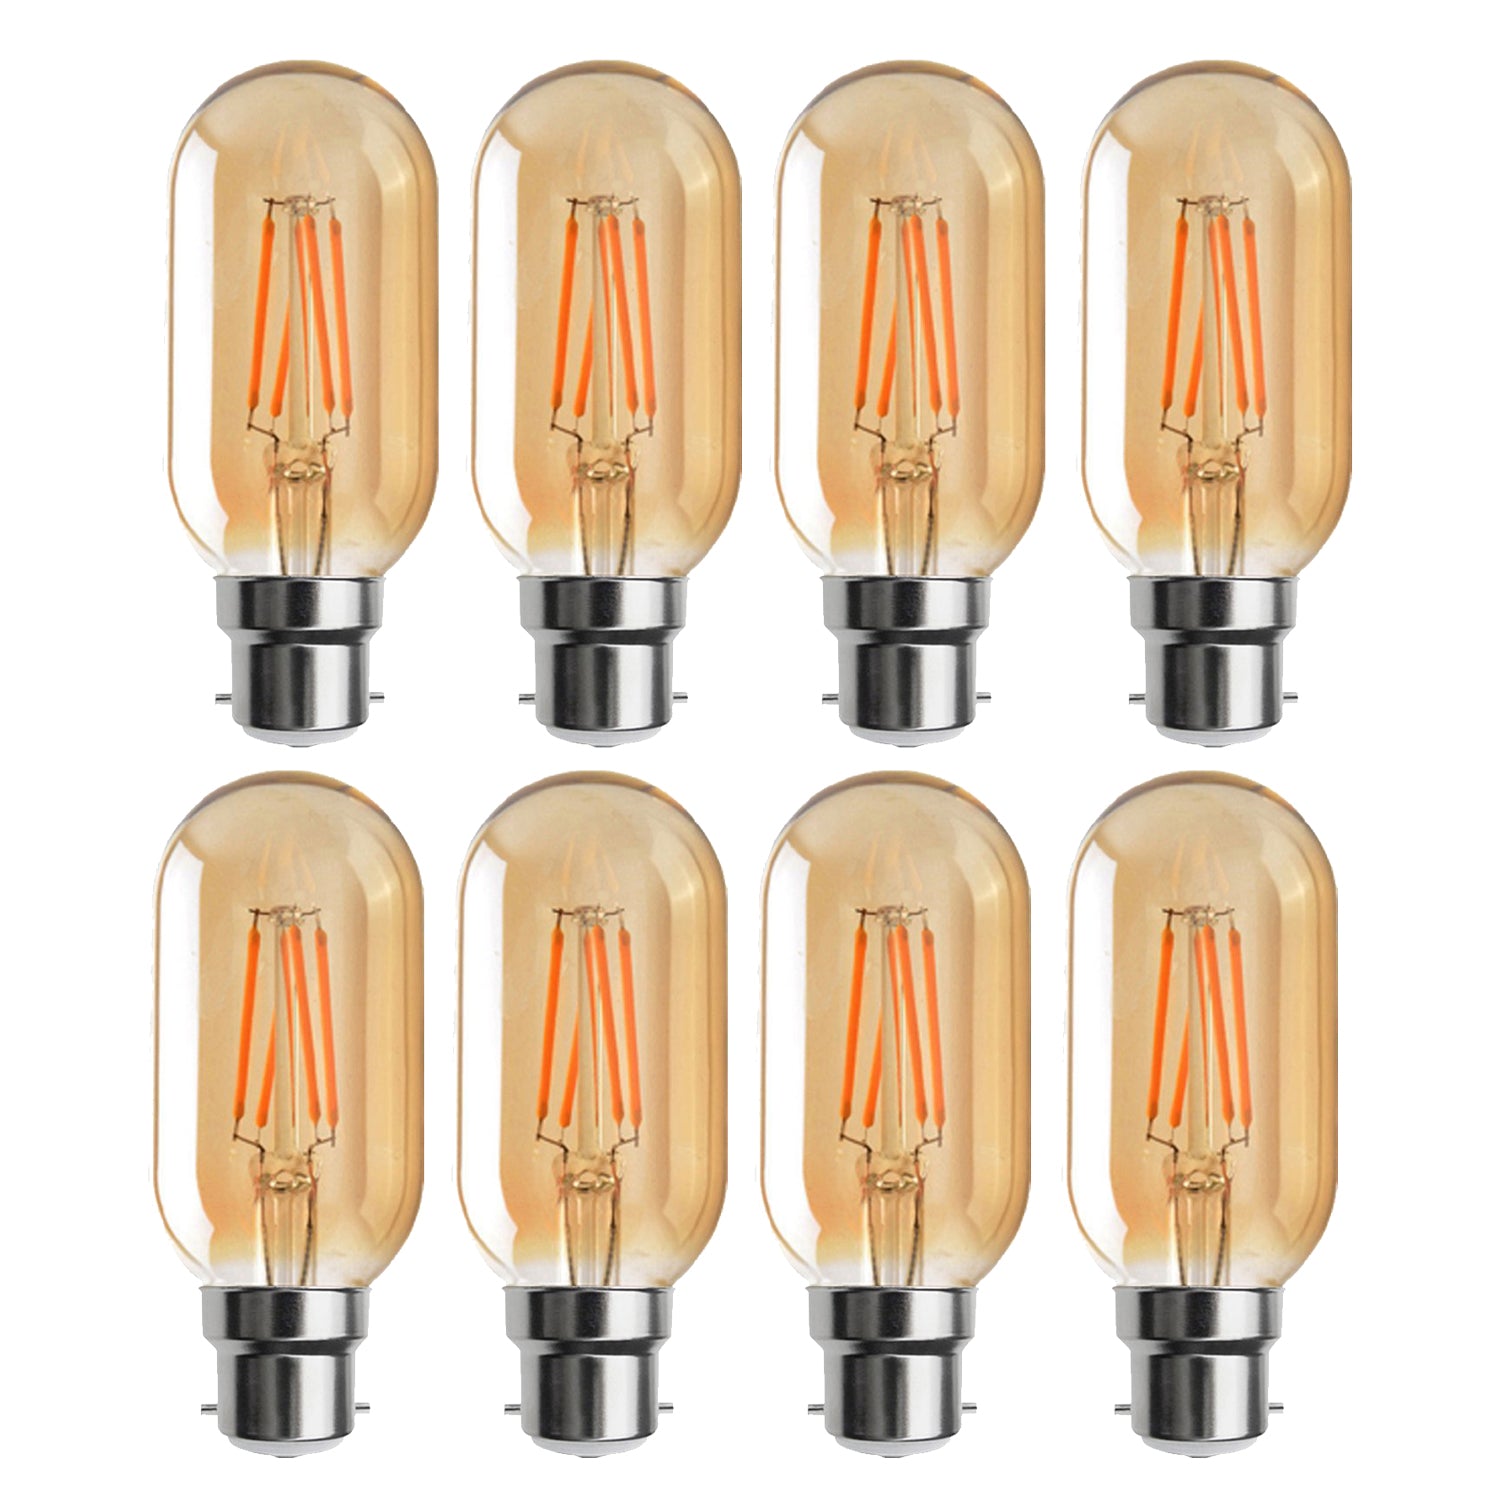 Vintage Bulb Dimmable - 8 Pack